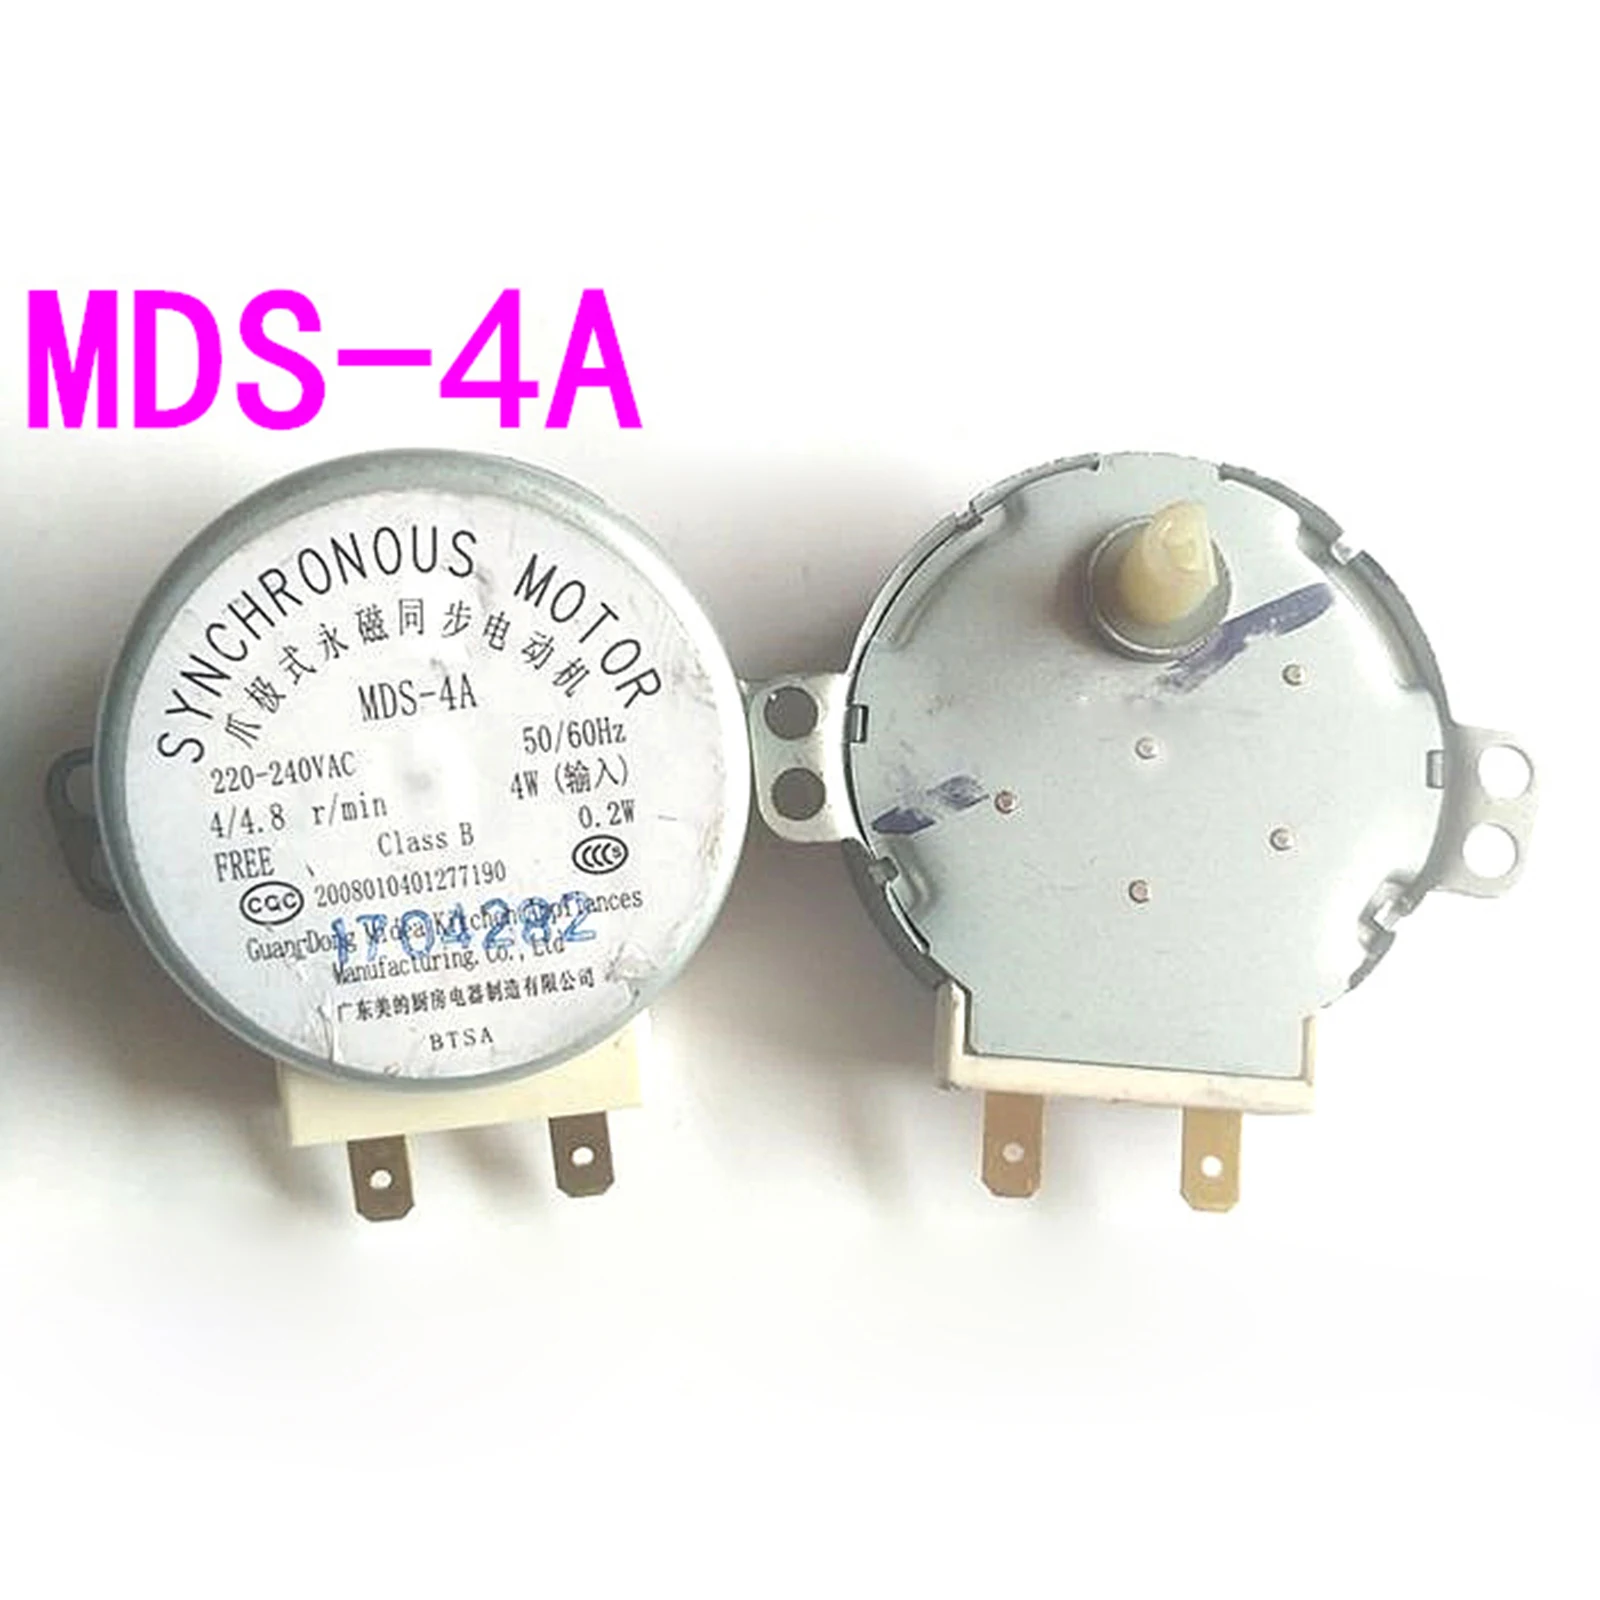 MDS-4A AC 220-240V 4/4.8RPM 4W Synchronous Motor for beauty Microwave Oven 